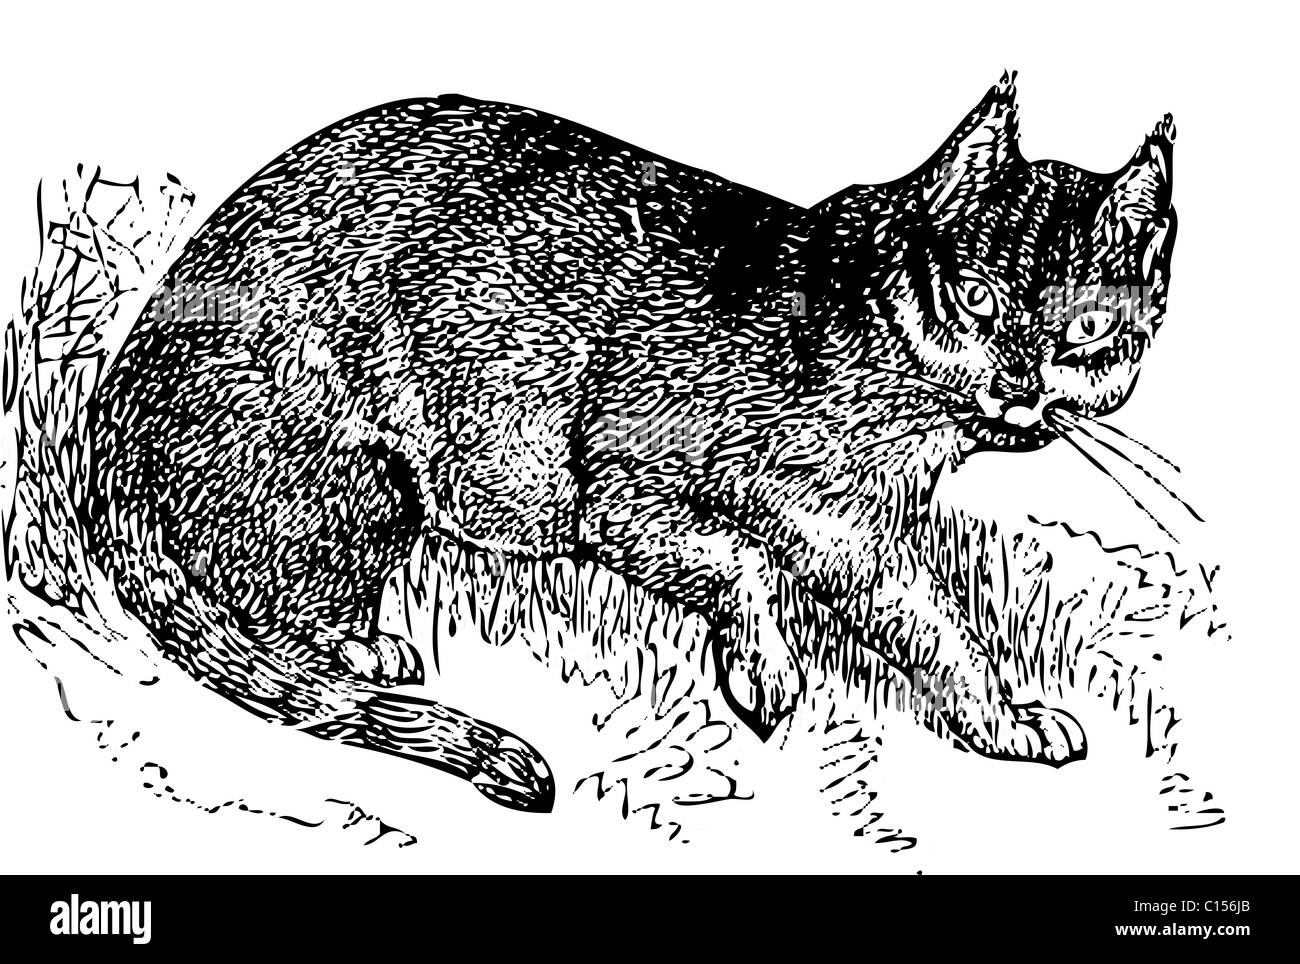 An old engraving of a wild cat (felis catus). Stock Photo